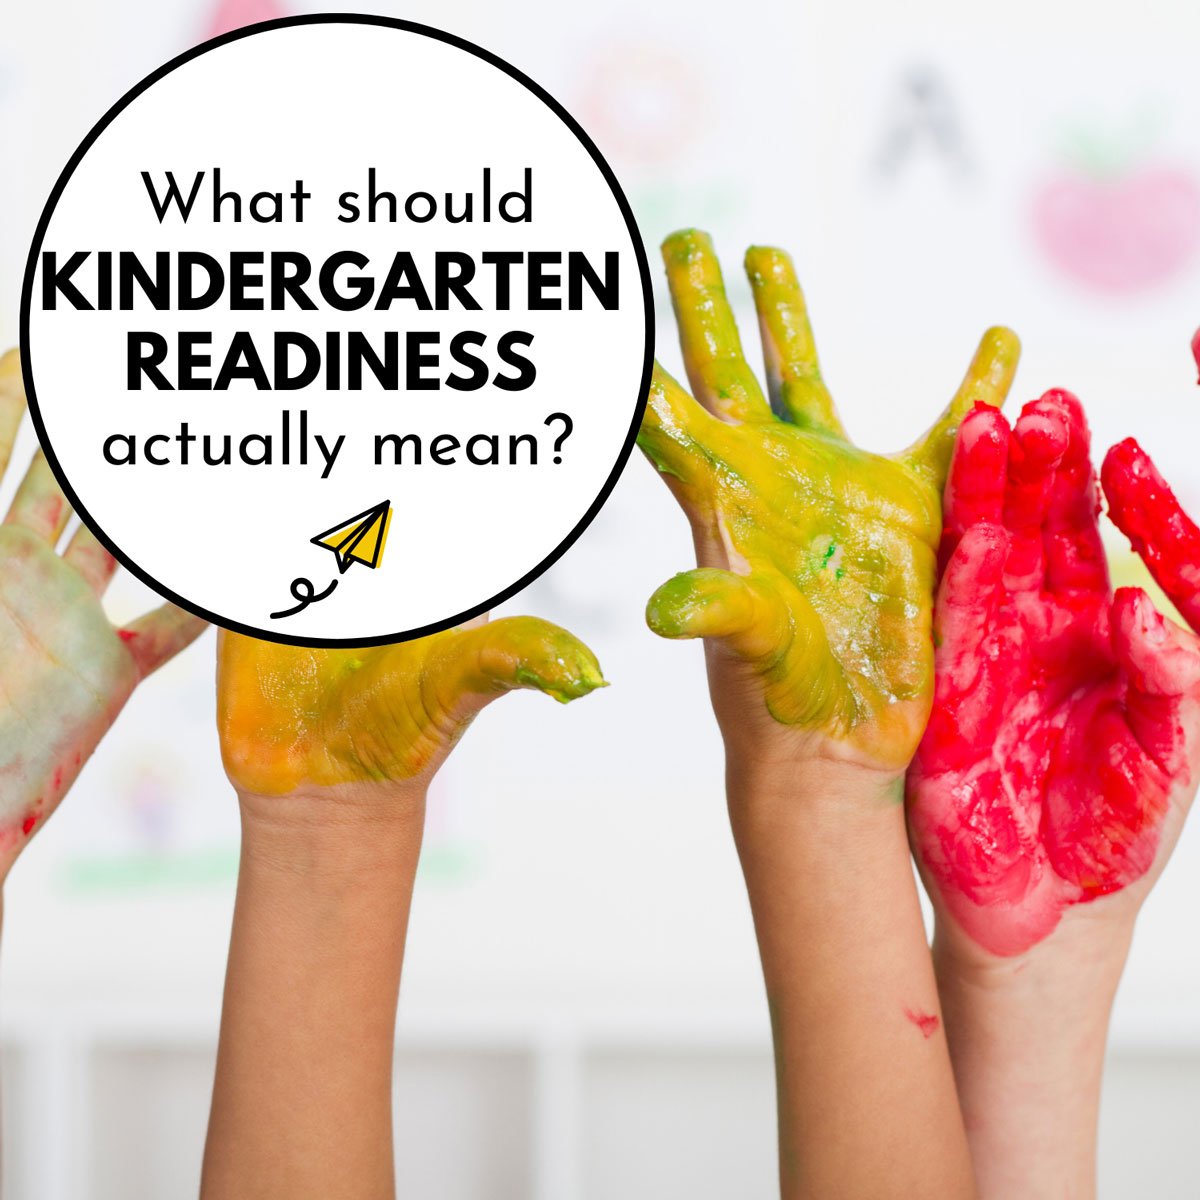 Kid hands covered in paint are raised in the air. Image reads: What should kindergarten readiness actually mean?